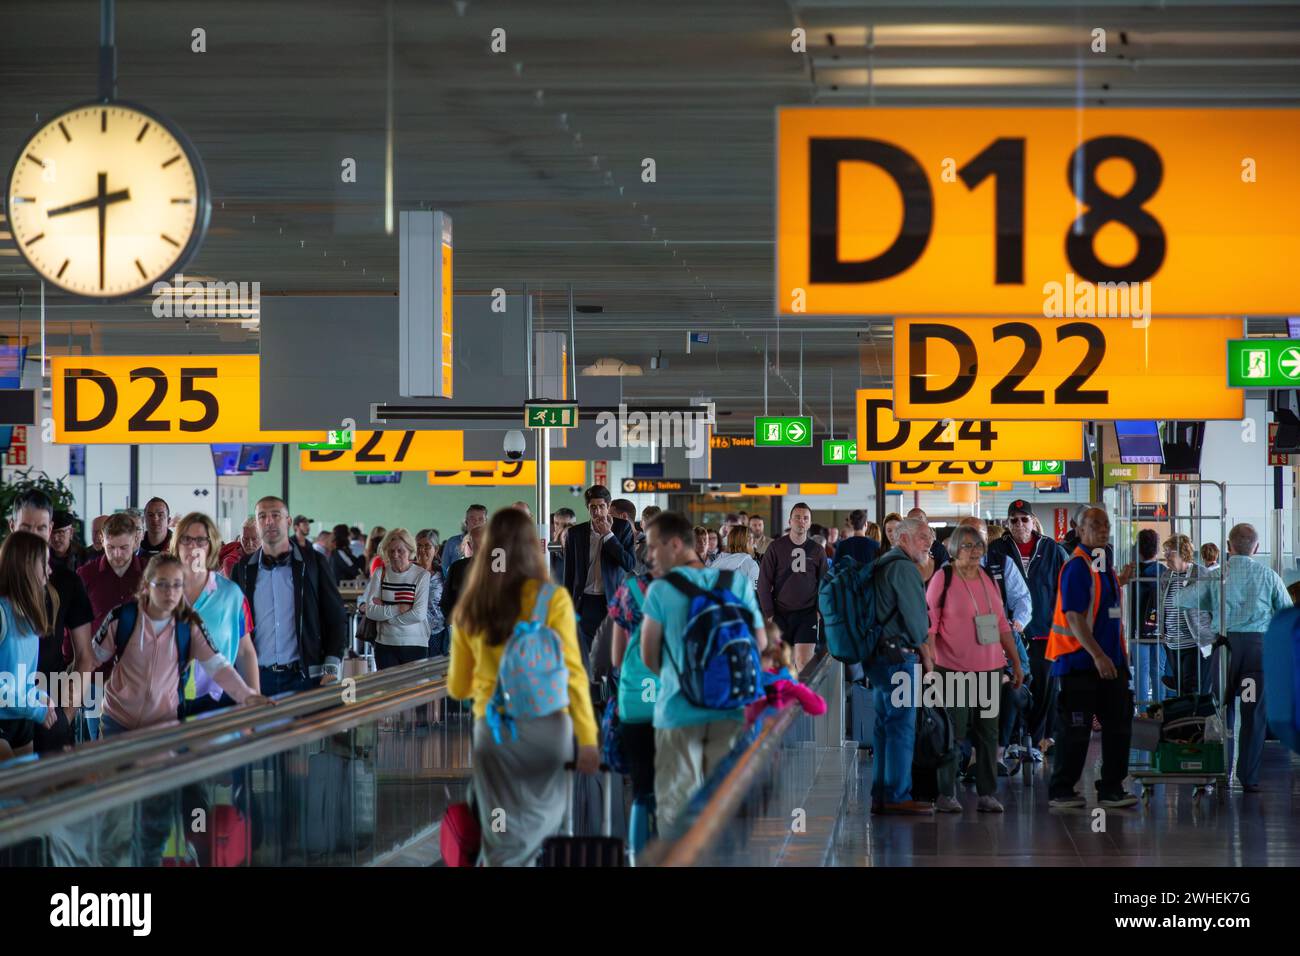 '09.07.2019, Netherlands, North Holland, Amsterdam - Gates and escalators in the transit area of Amsterdam Airport Schiphol (AMS). 00A190709D051CAROEX Stock Photo